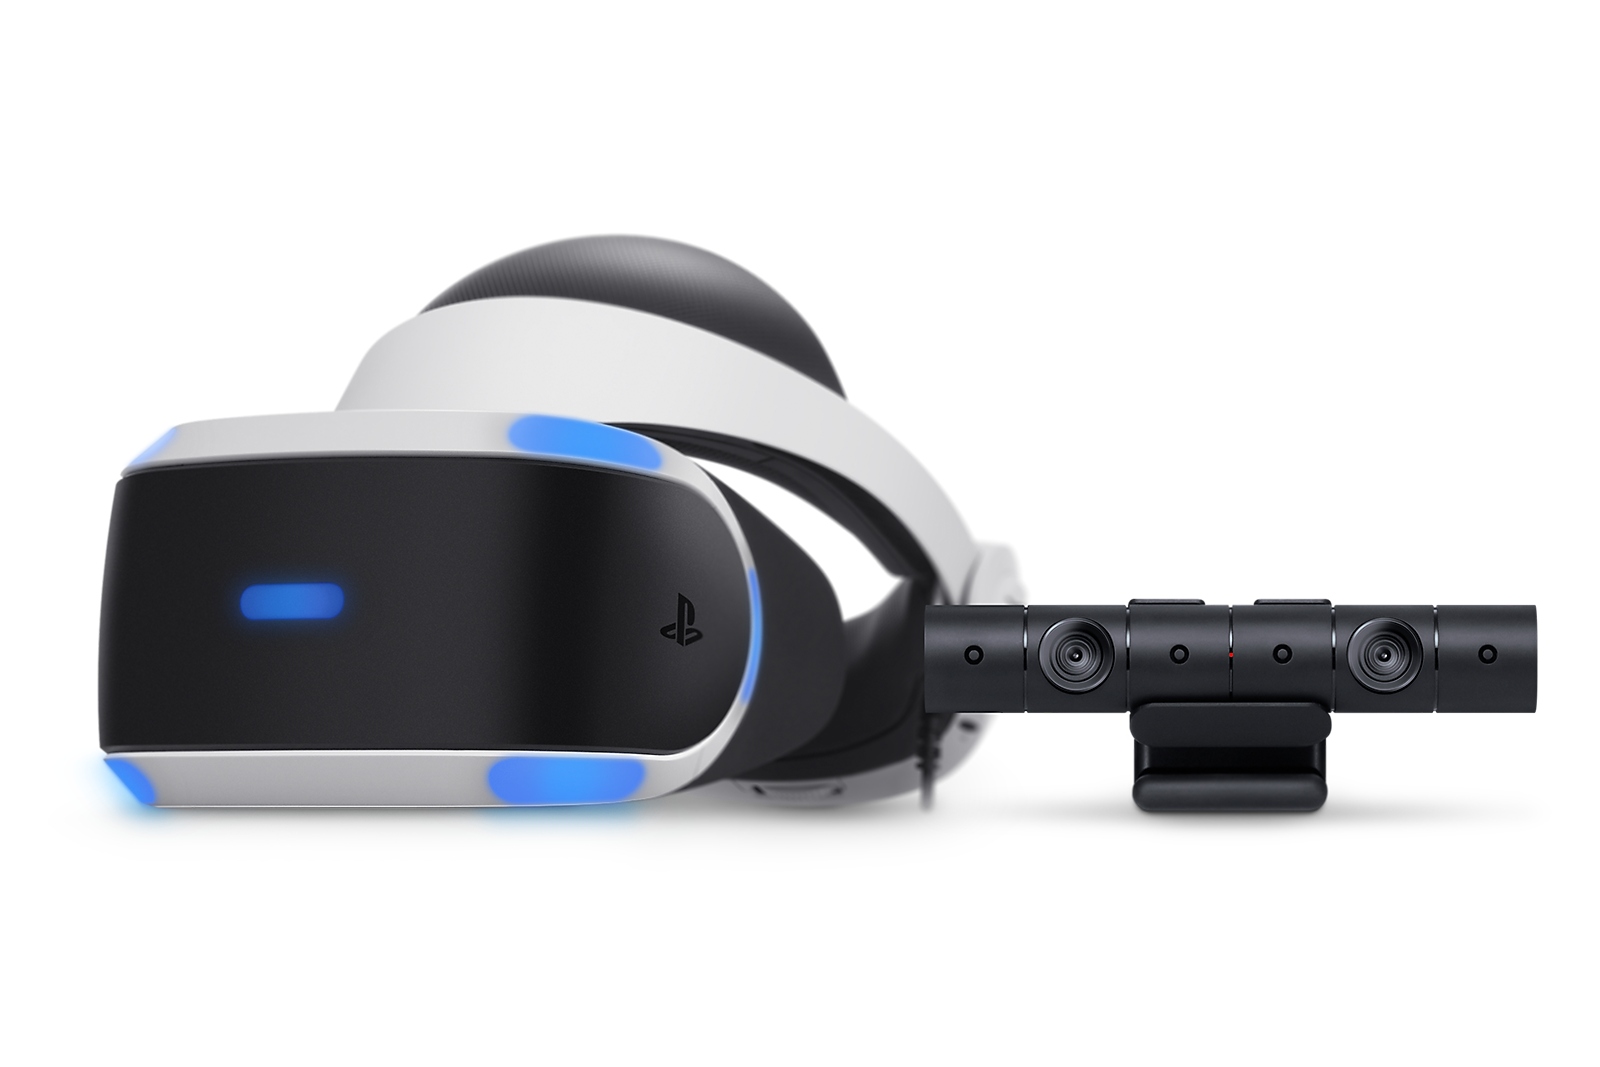 PlayStation VR with Camera image